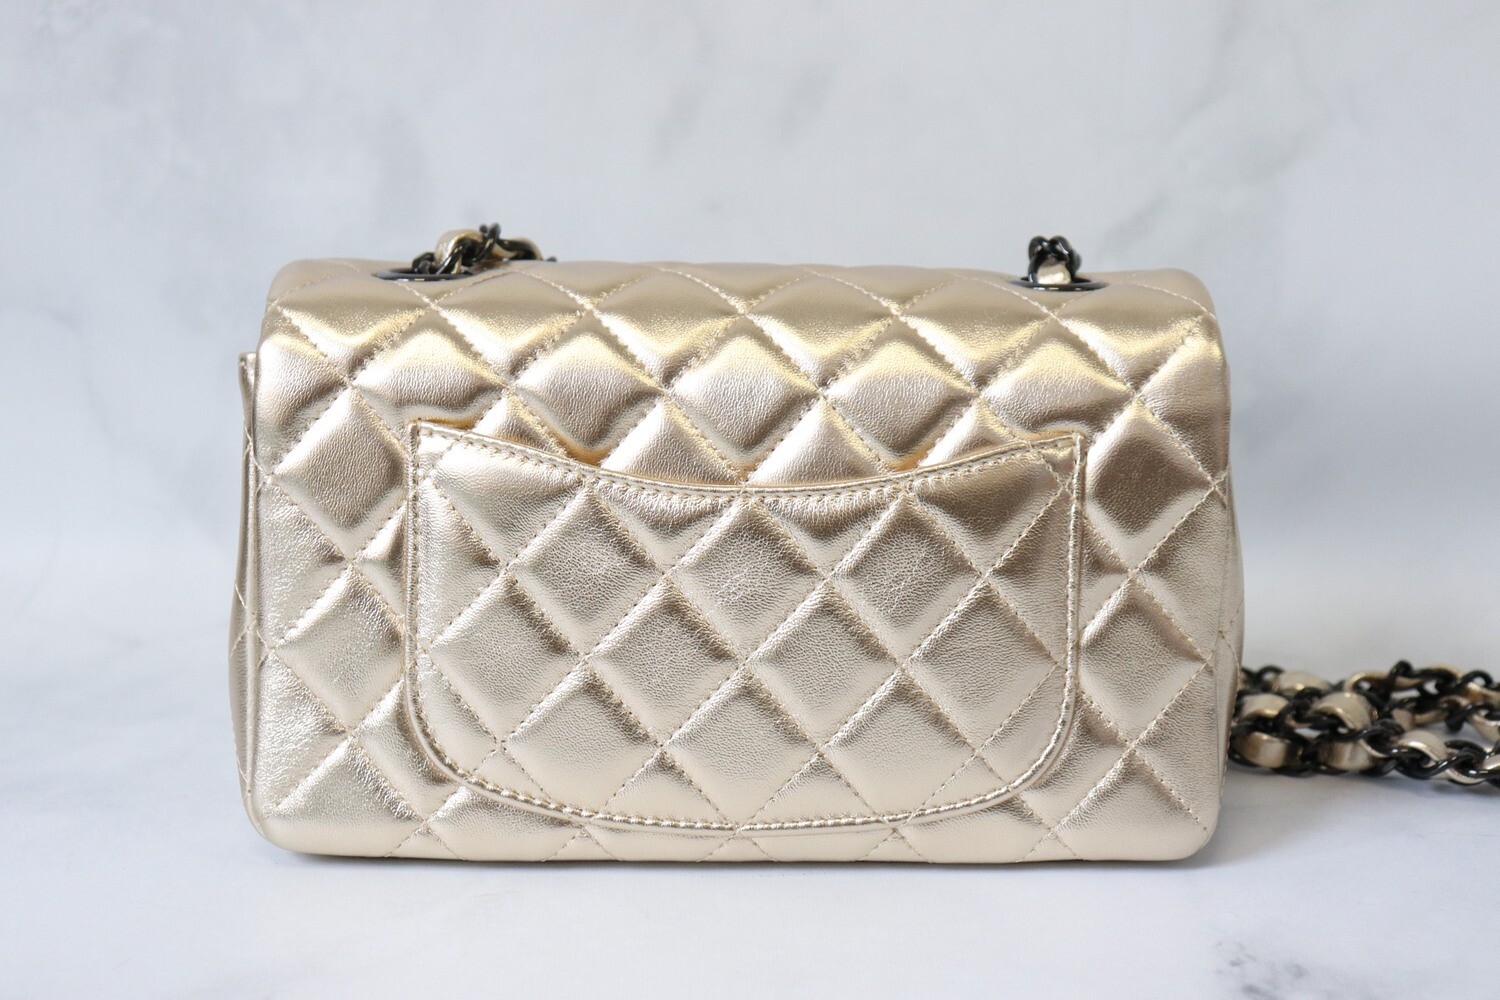 Chanel Mini Classic Flap, Gold Lambskin with So Black Hardware, New in Box